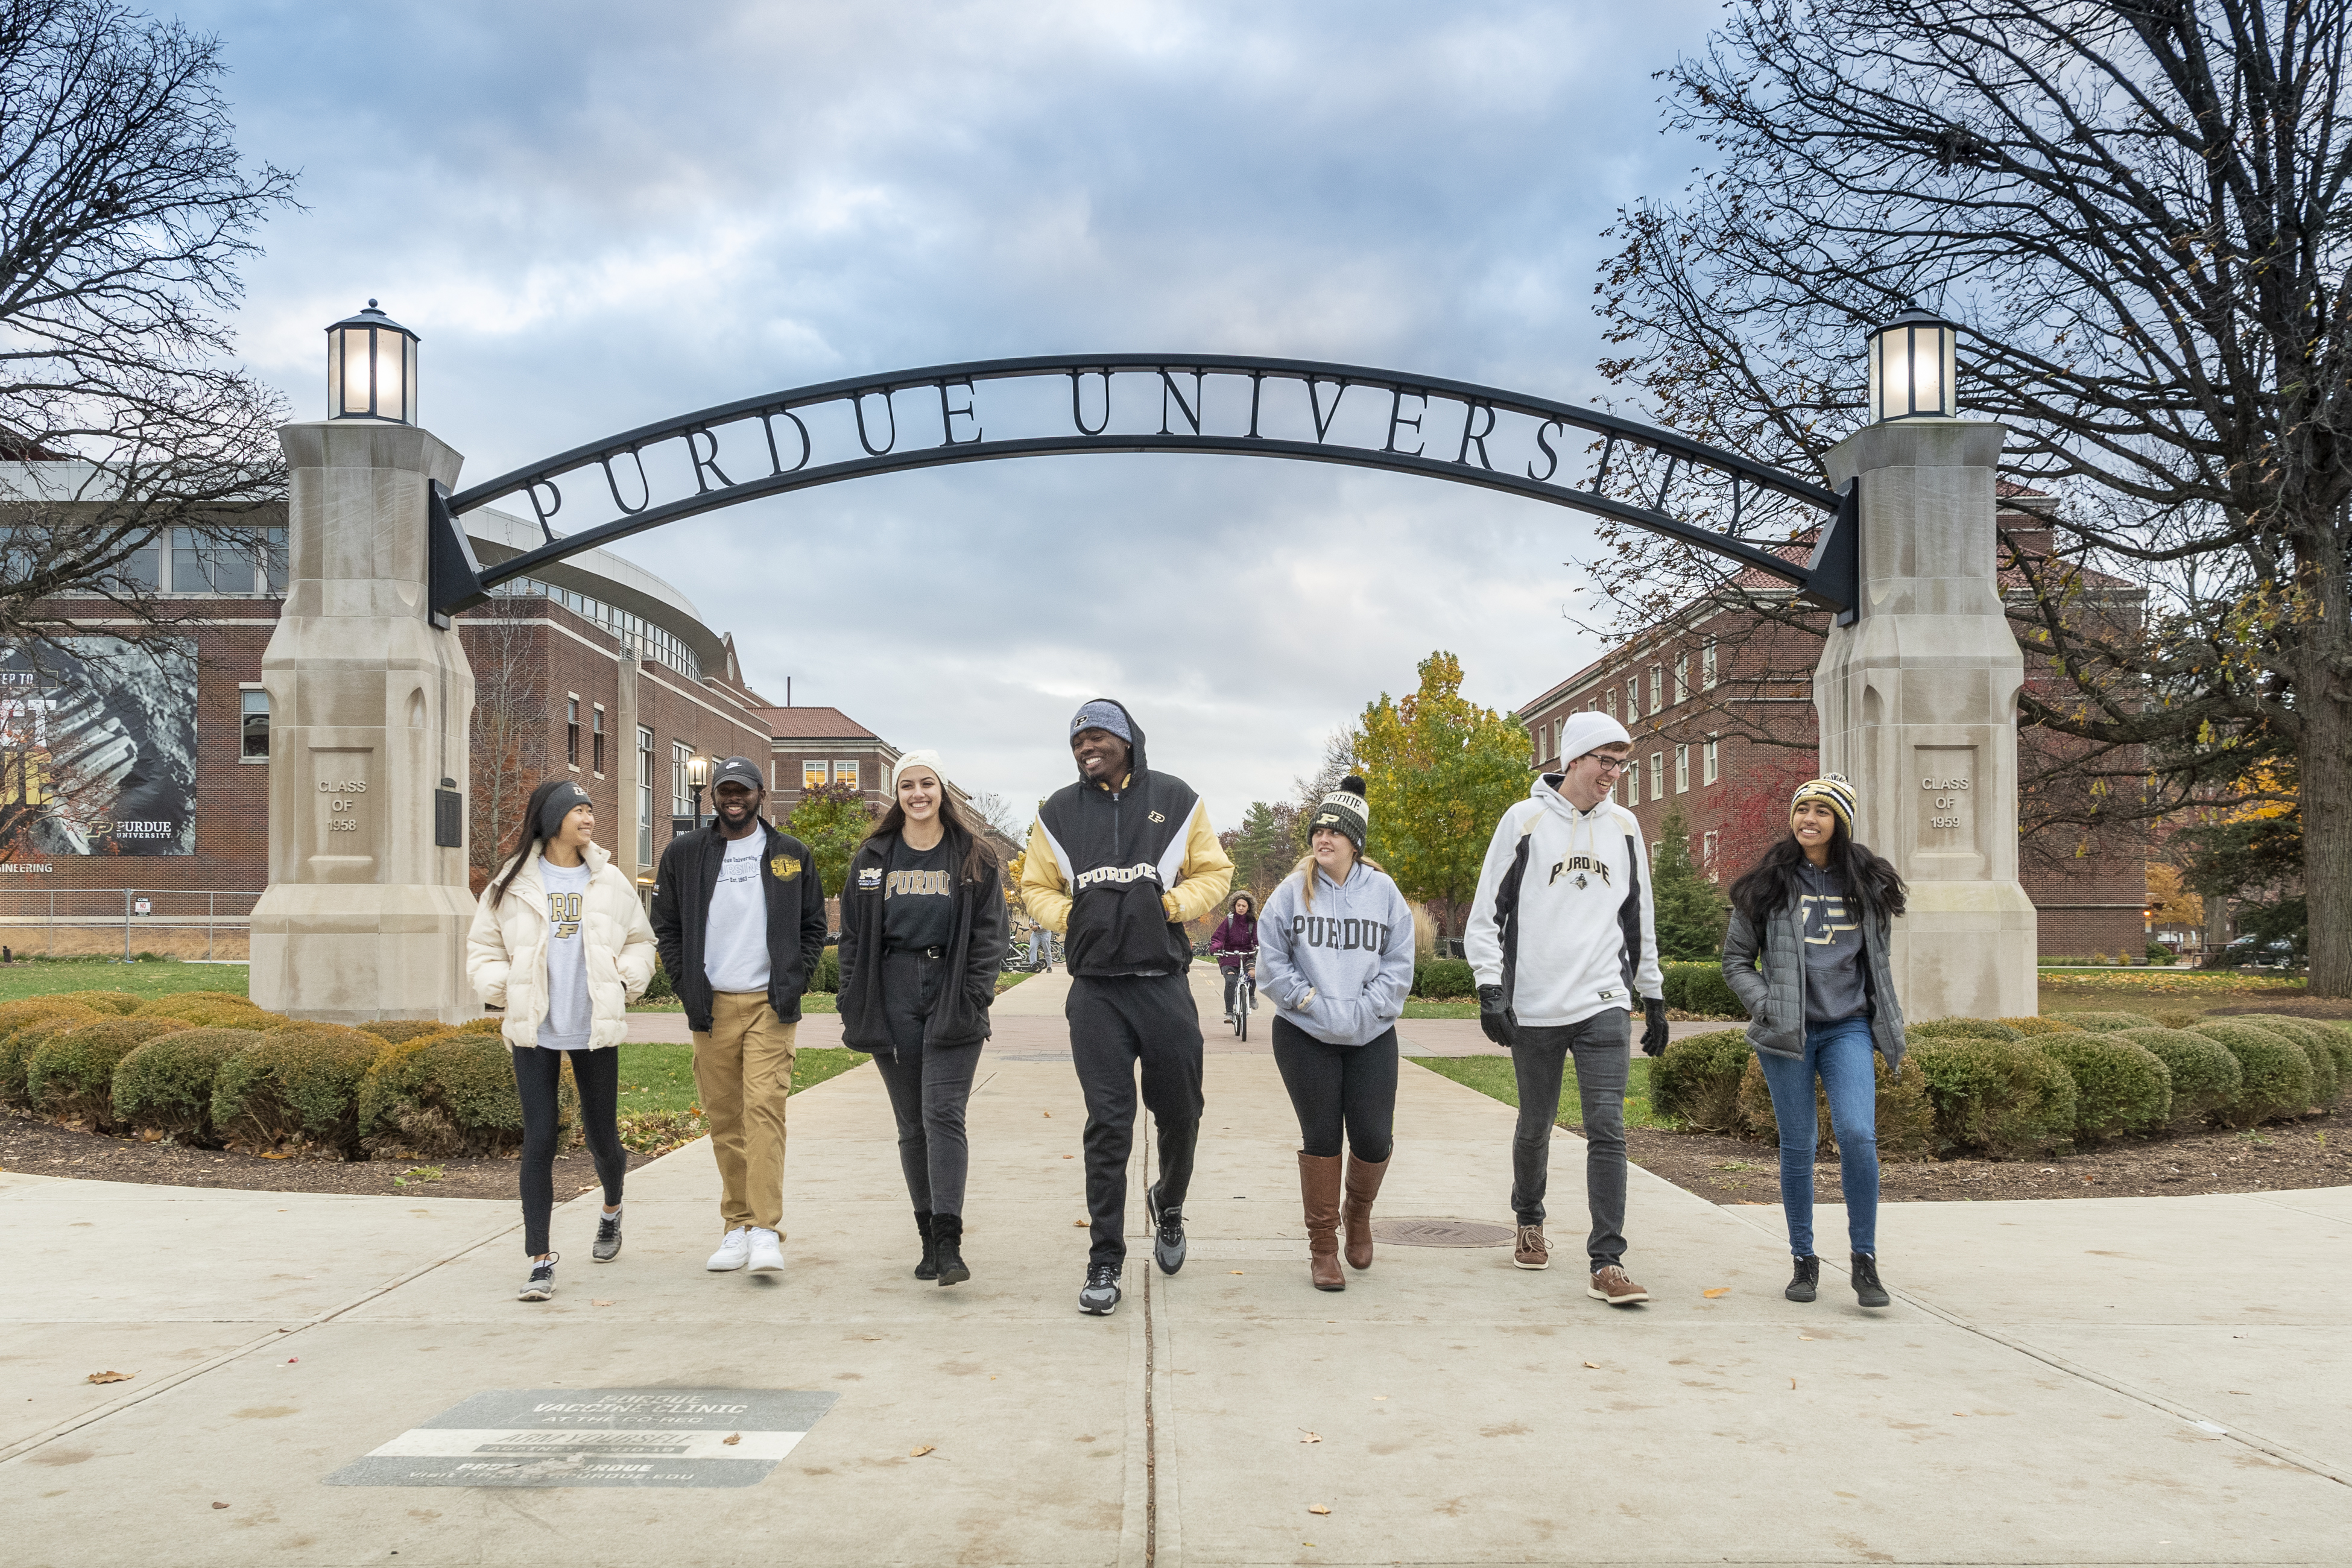 Students act out scenes by the “Gateway to the Future” arch near Armstrong Hall.